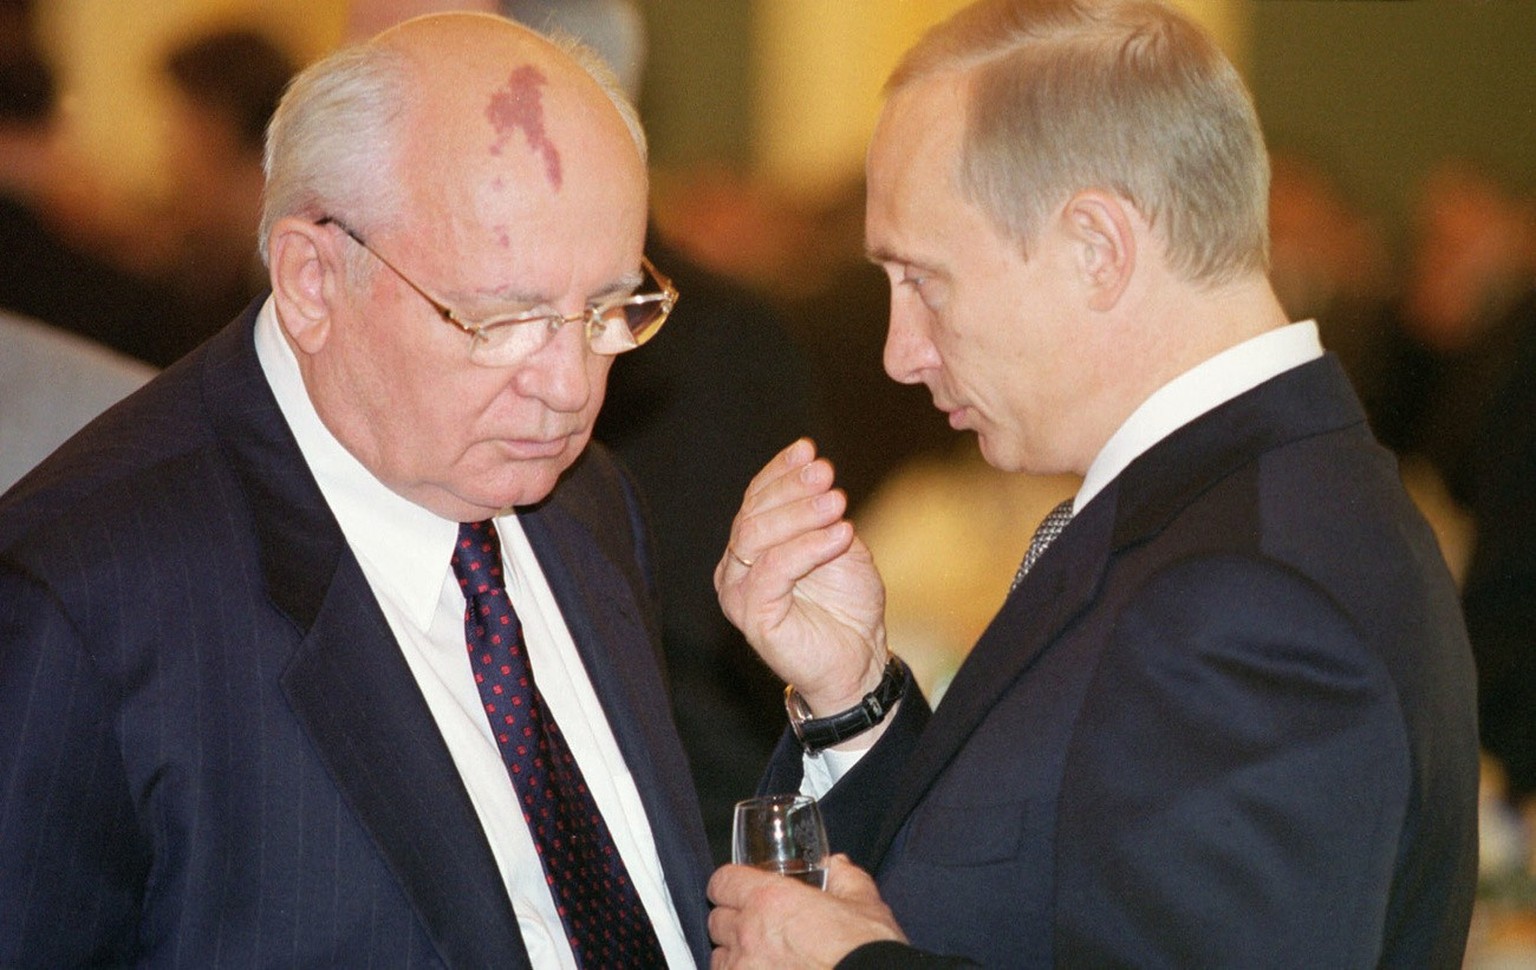 President of Russia Vladimir Putin (R) talks to Mikhail Gorbachev (L), the first and the last President of the Soviet Union during the state reception, held in the Grand Kremlin Palace in Moscow, Wedn ...